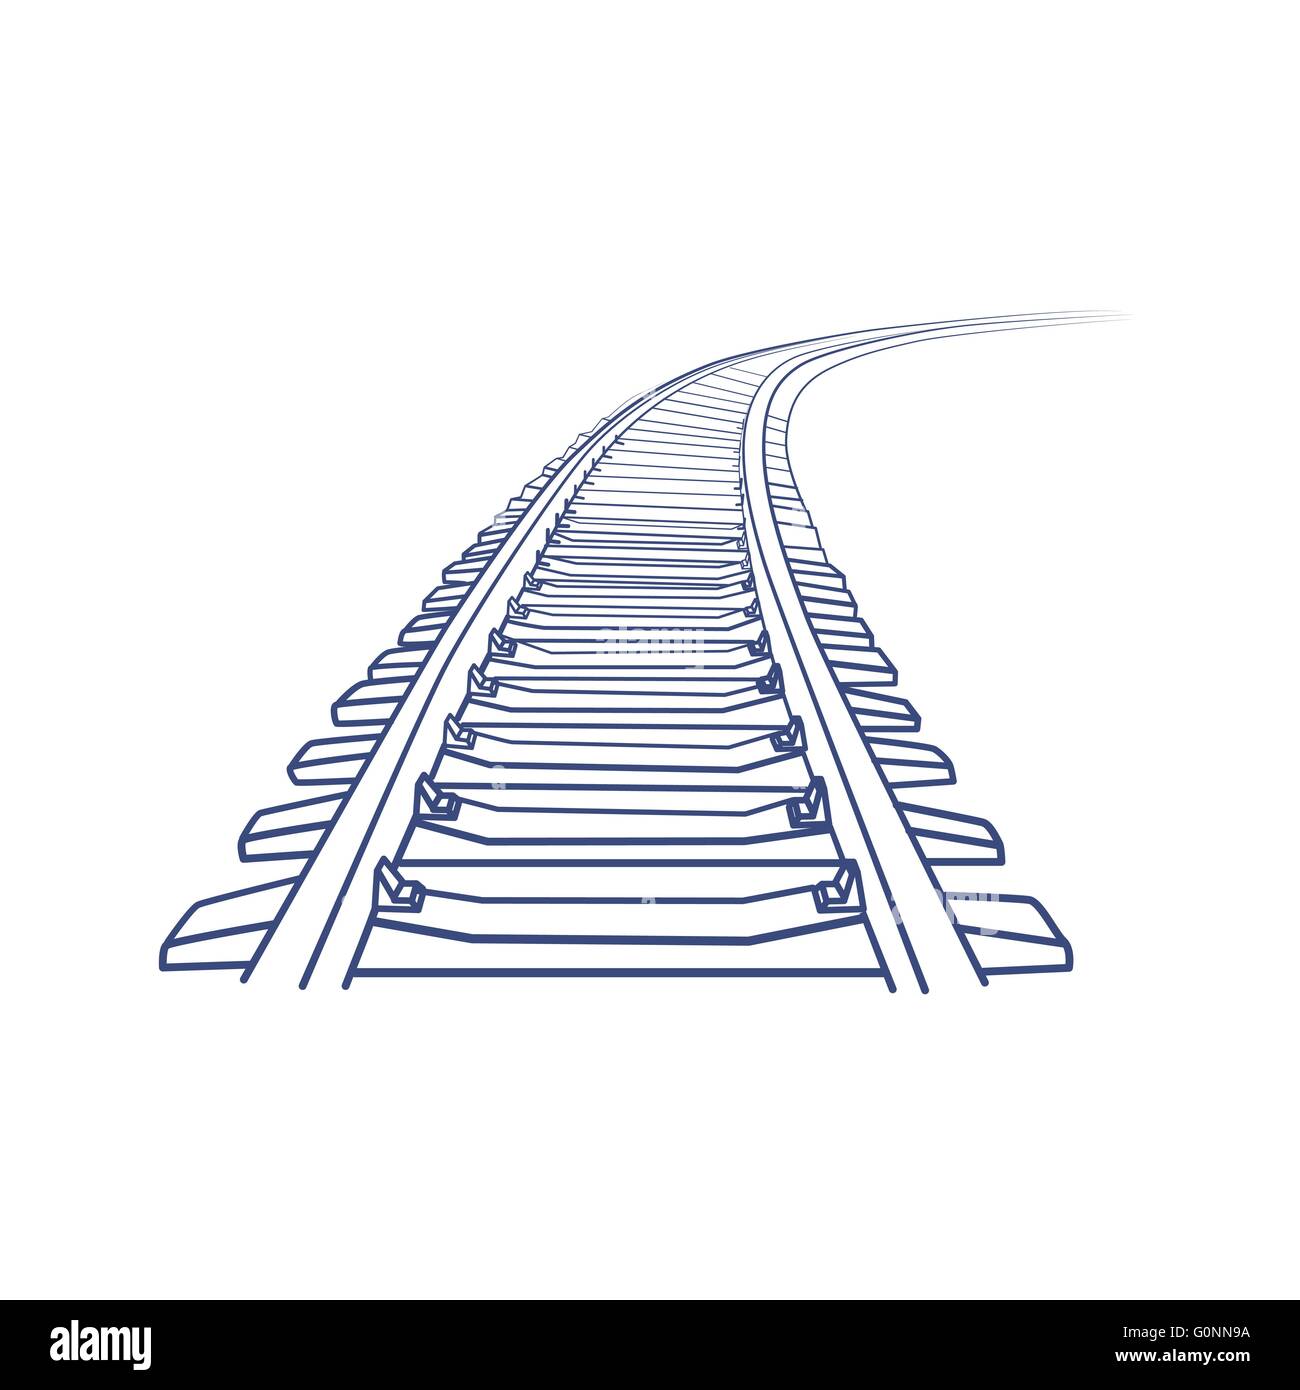 Sketch of Curved Train track. Outlines. Stock Vector